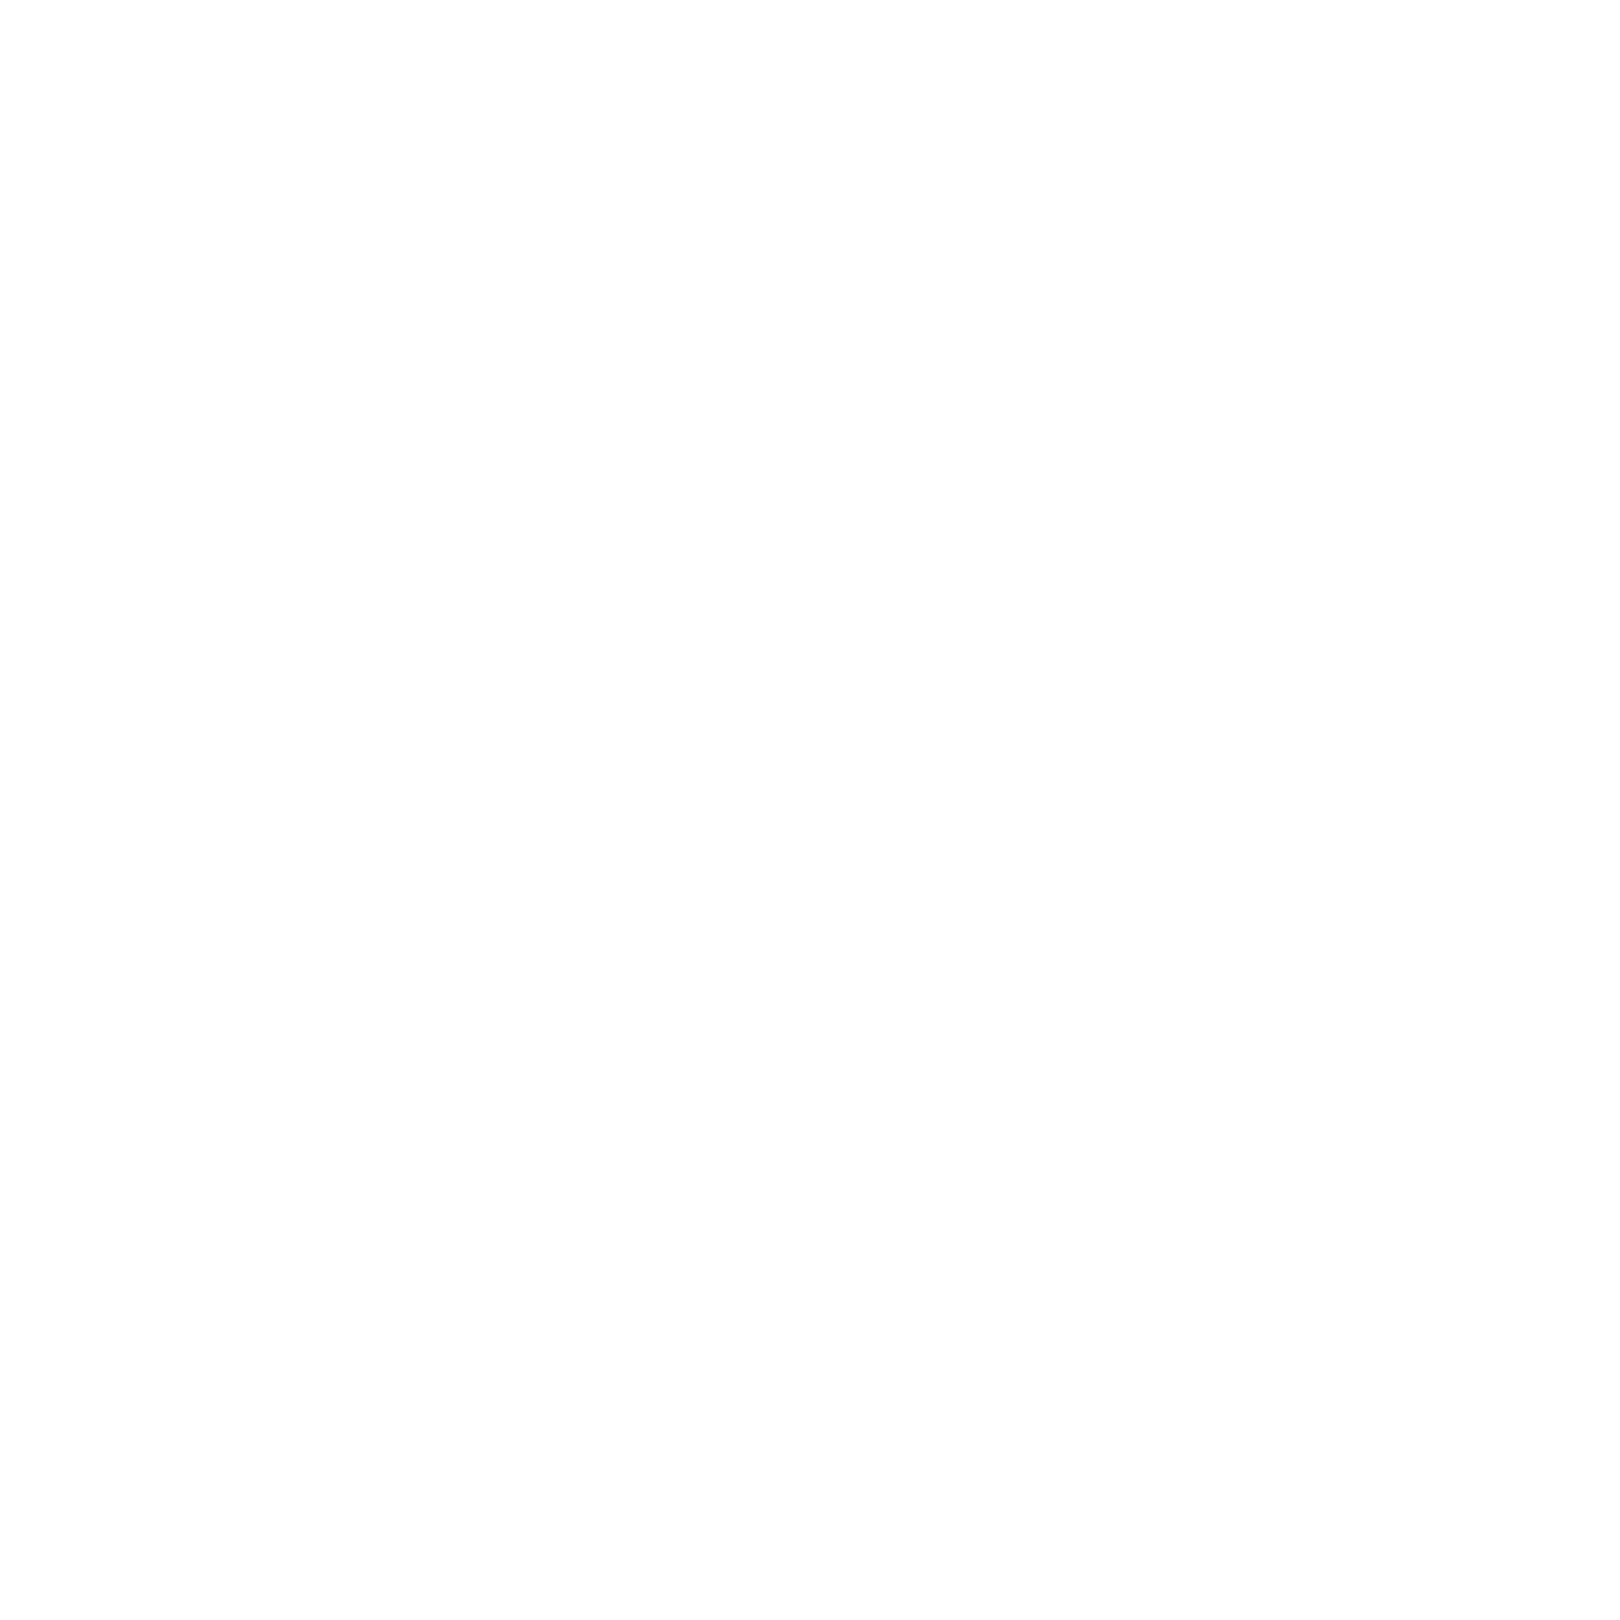 Icon of two women saying Envio is woman owned